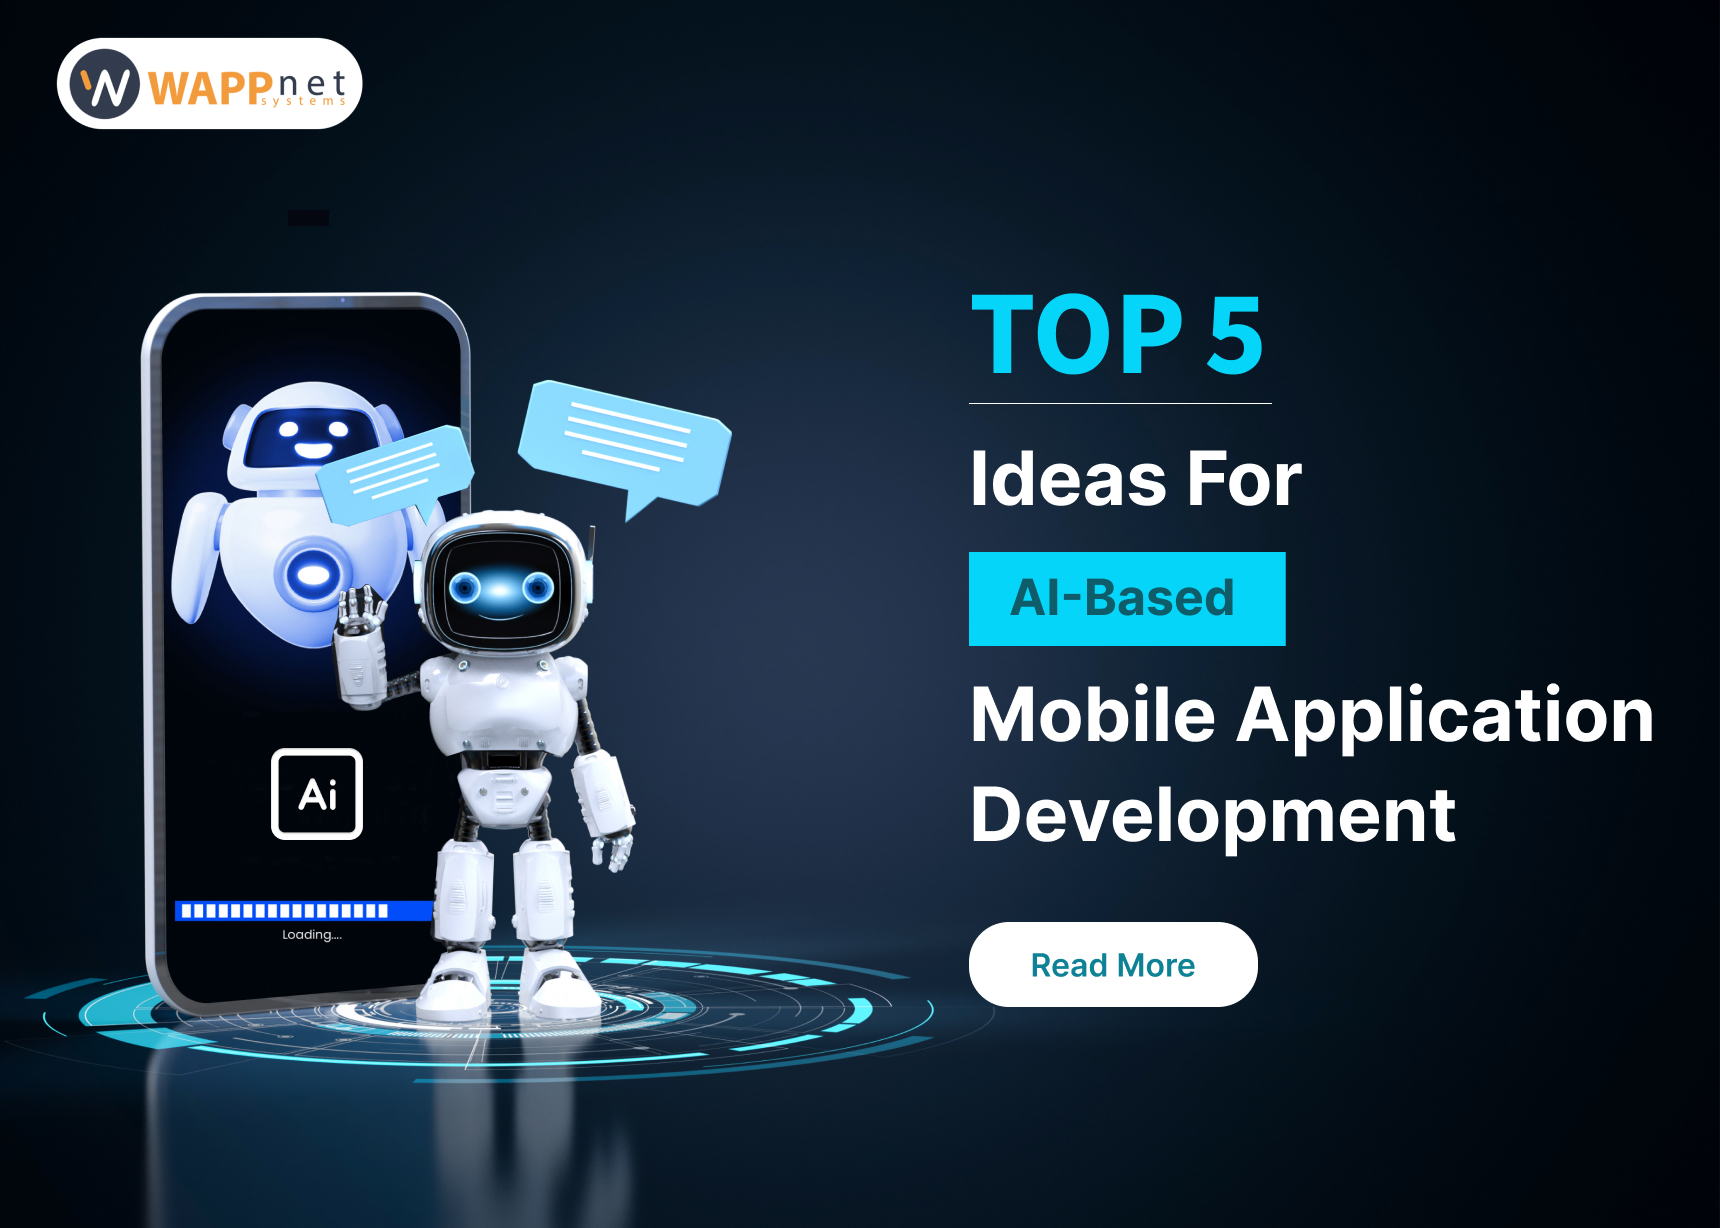 Top 5 Ideas for AI-based Mobile Application Development